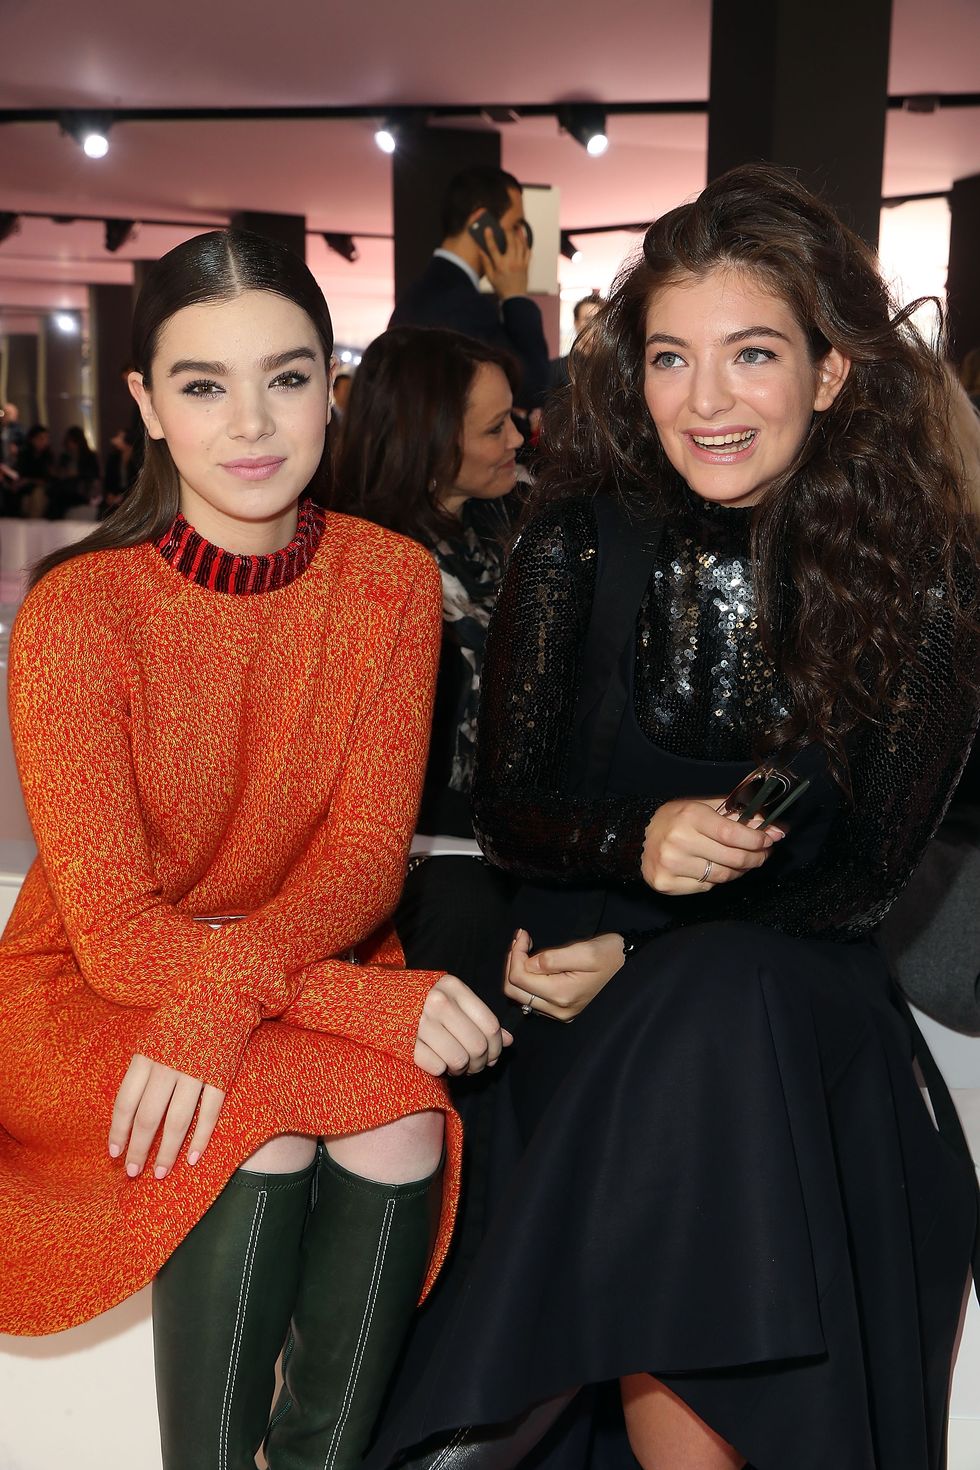 Lorde and Hailee Steinfeld at Paris Fashion Week